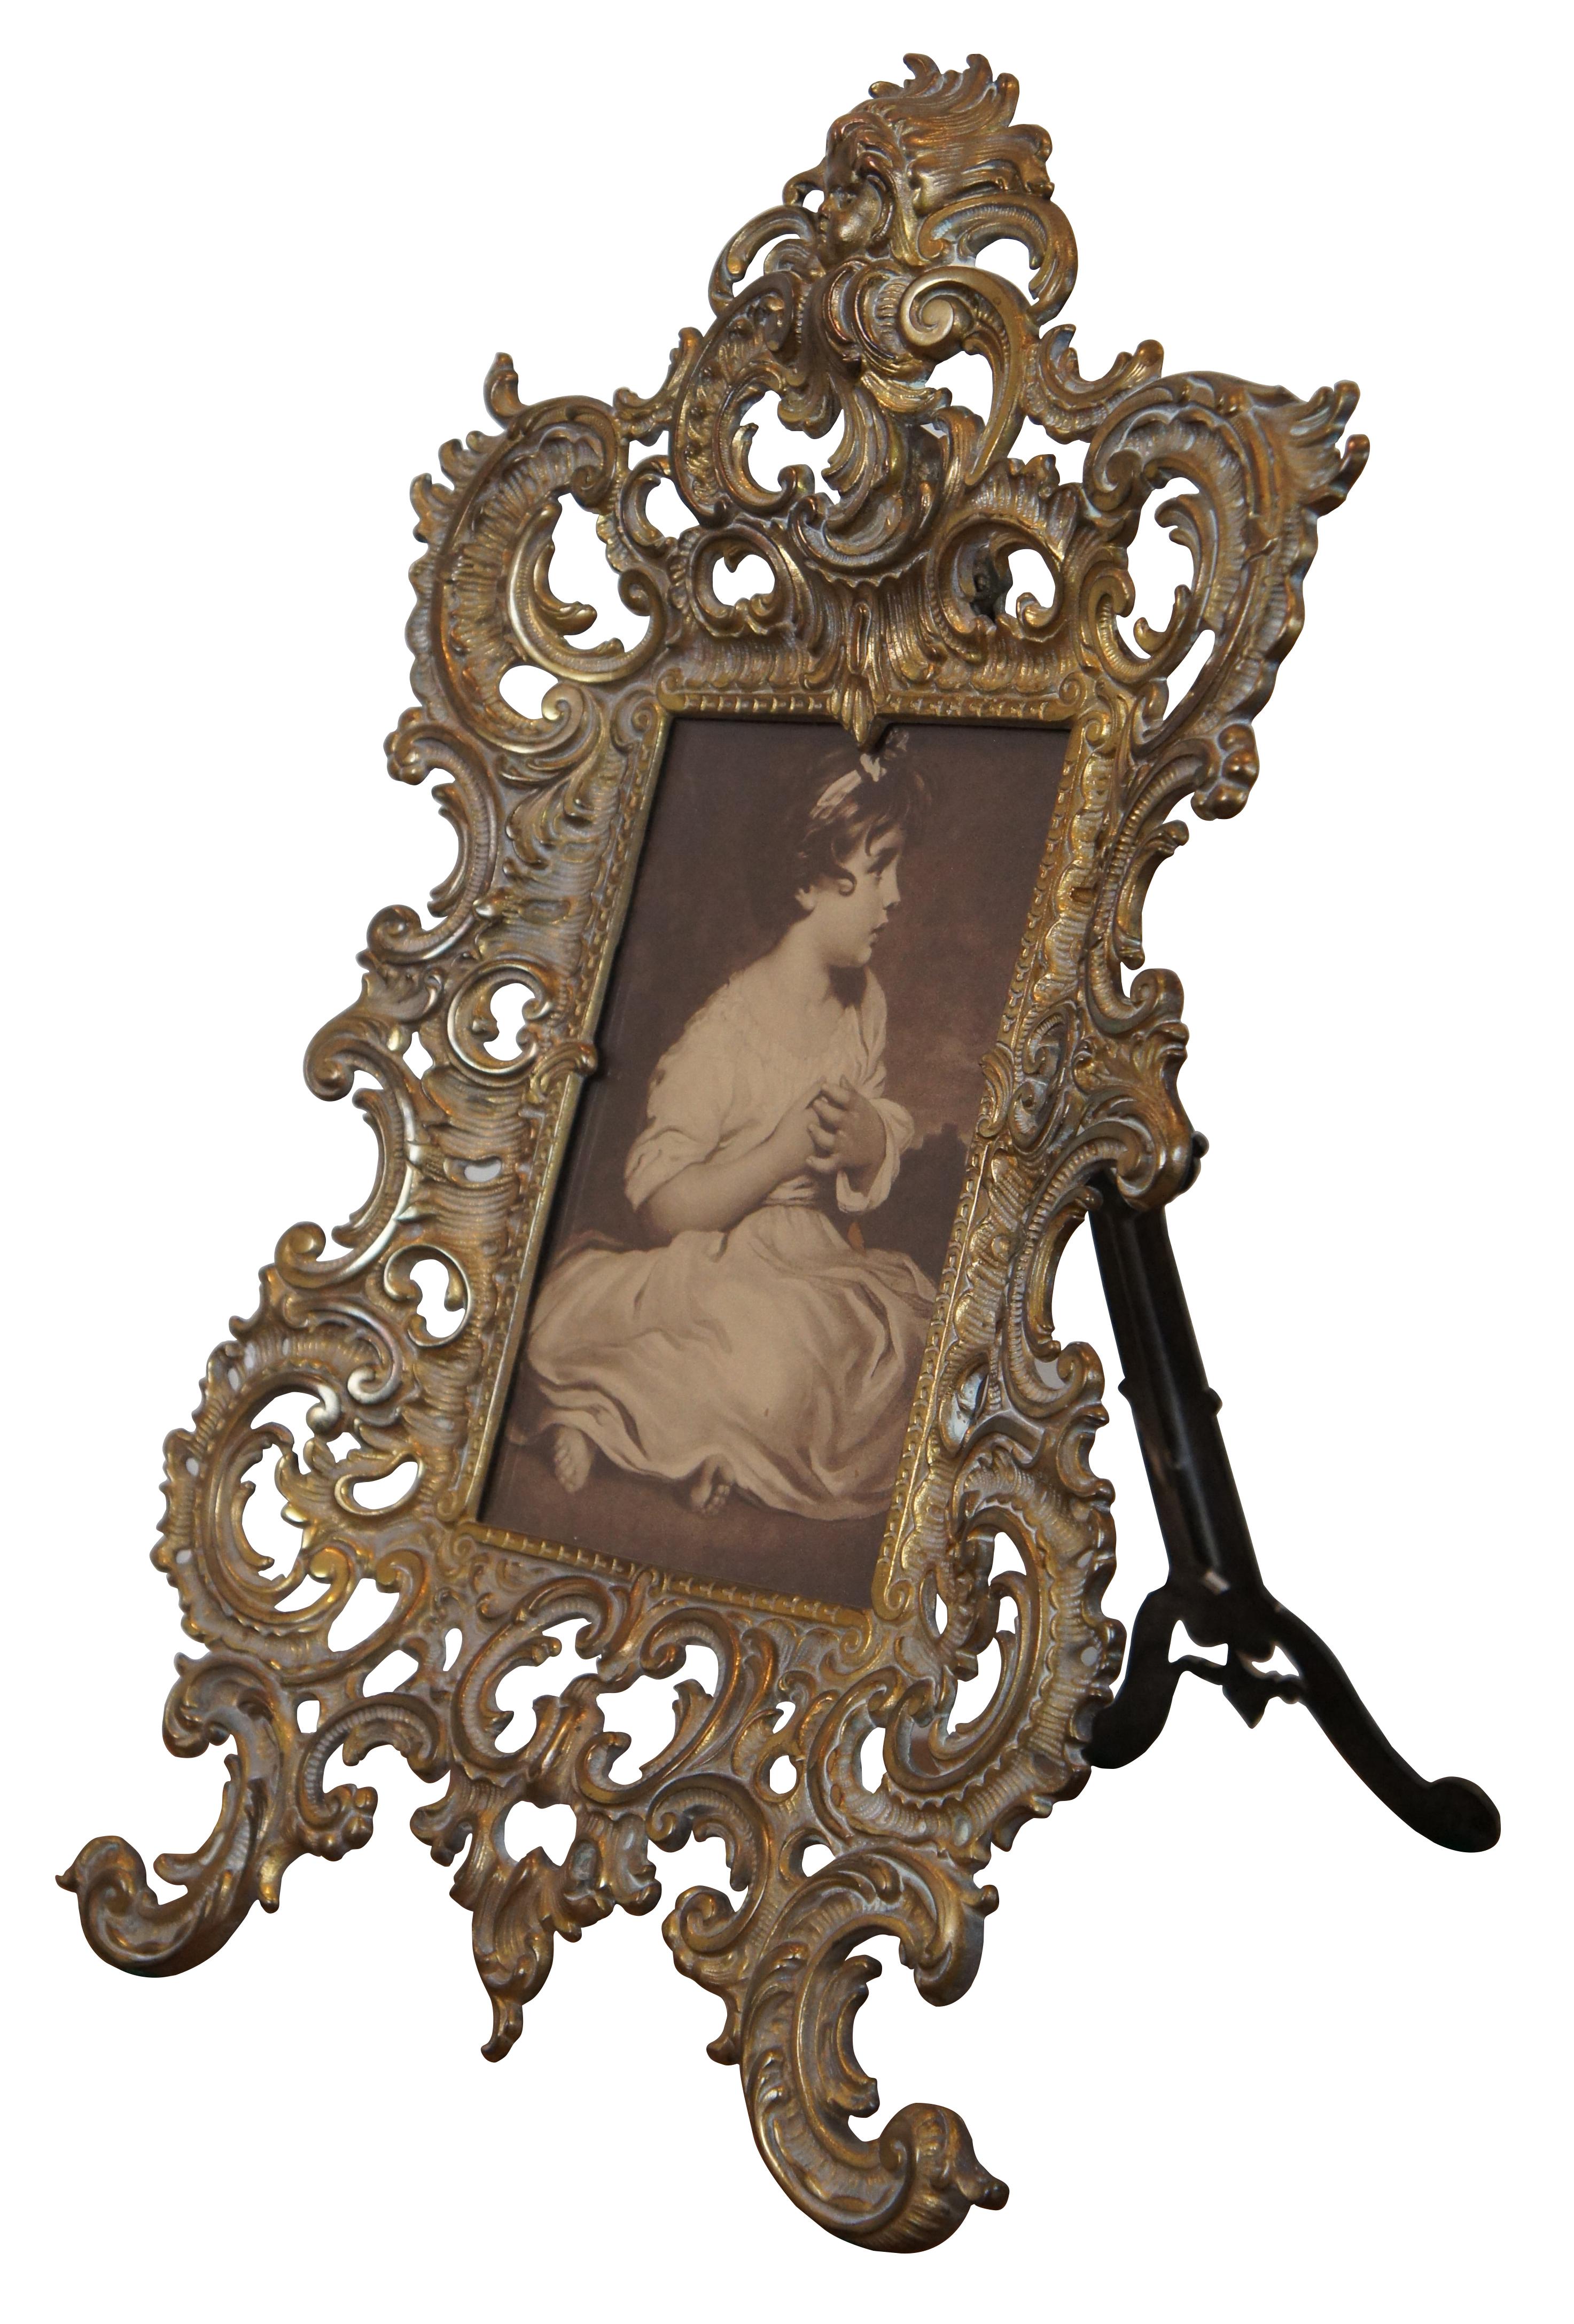 Antique late 19th century reticulated brass easel style picture vanity frame by The National Brass & Iron Works Company (NB & IW) number 2071, featuring a swirling foliate art nouveau design topped with a cherub face. Currently contains a black and